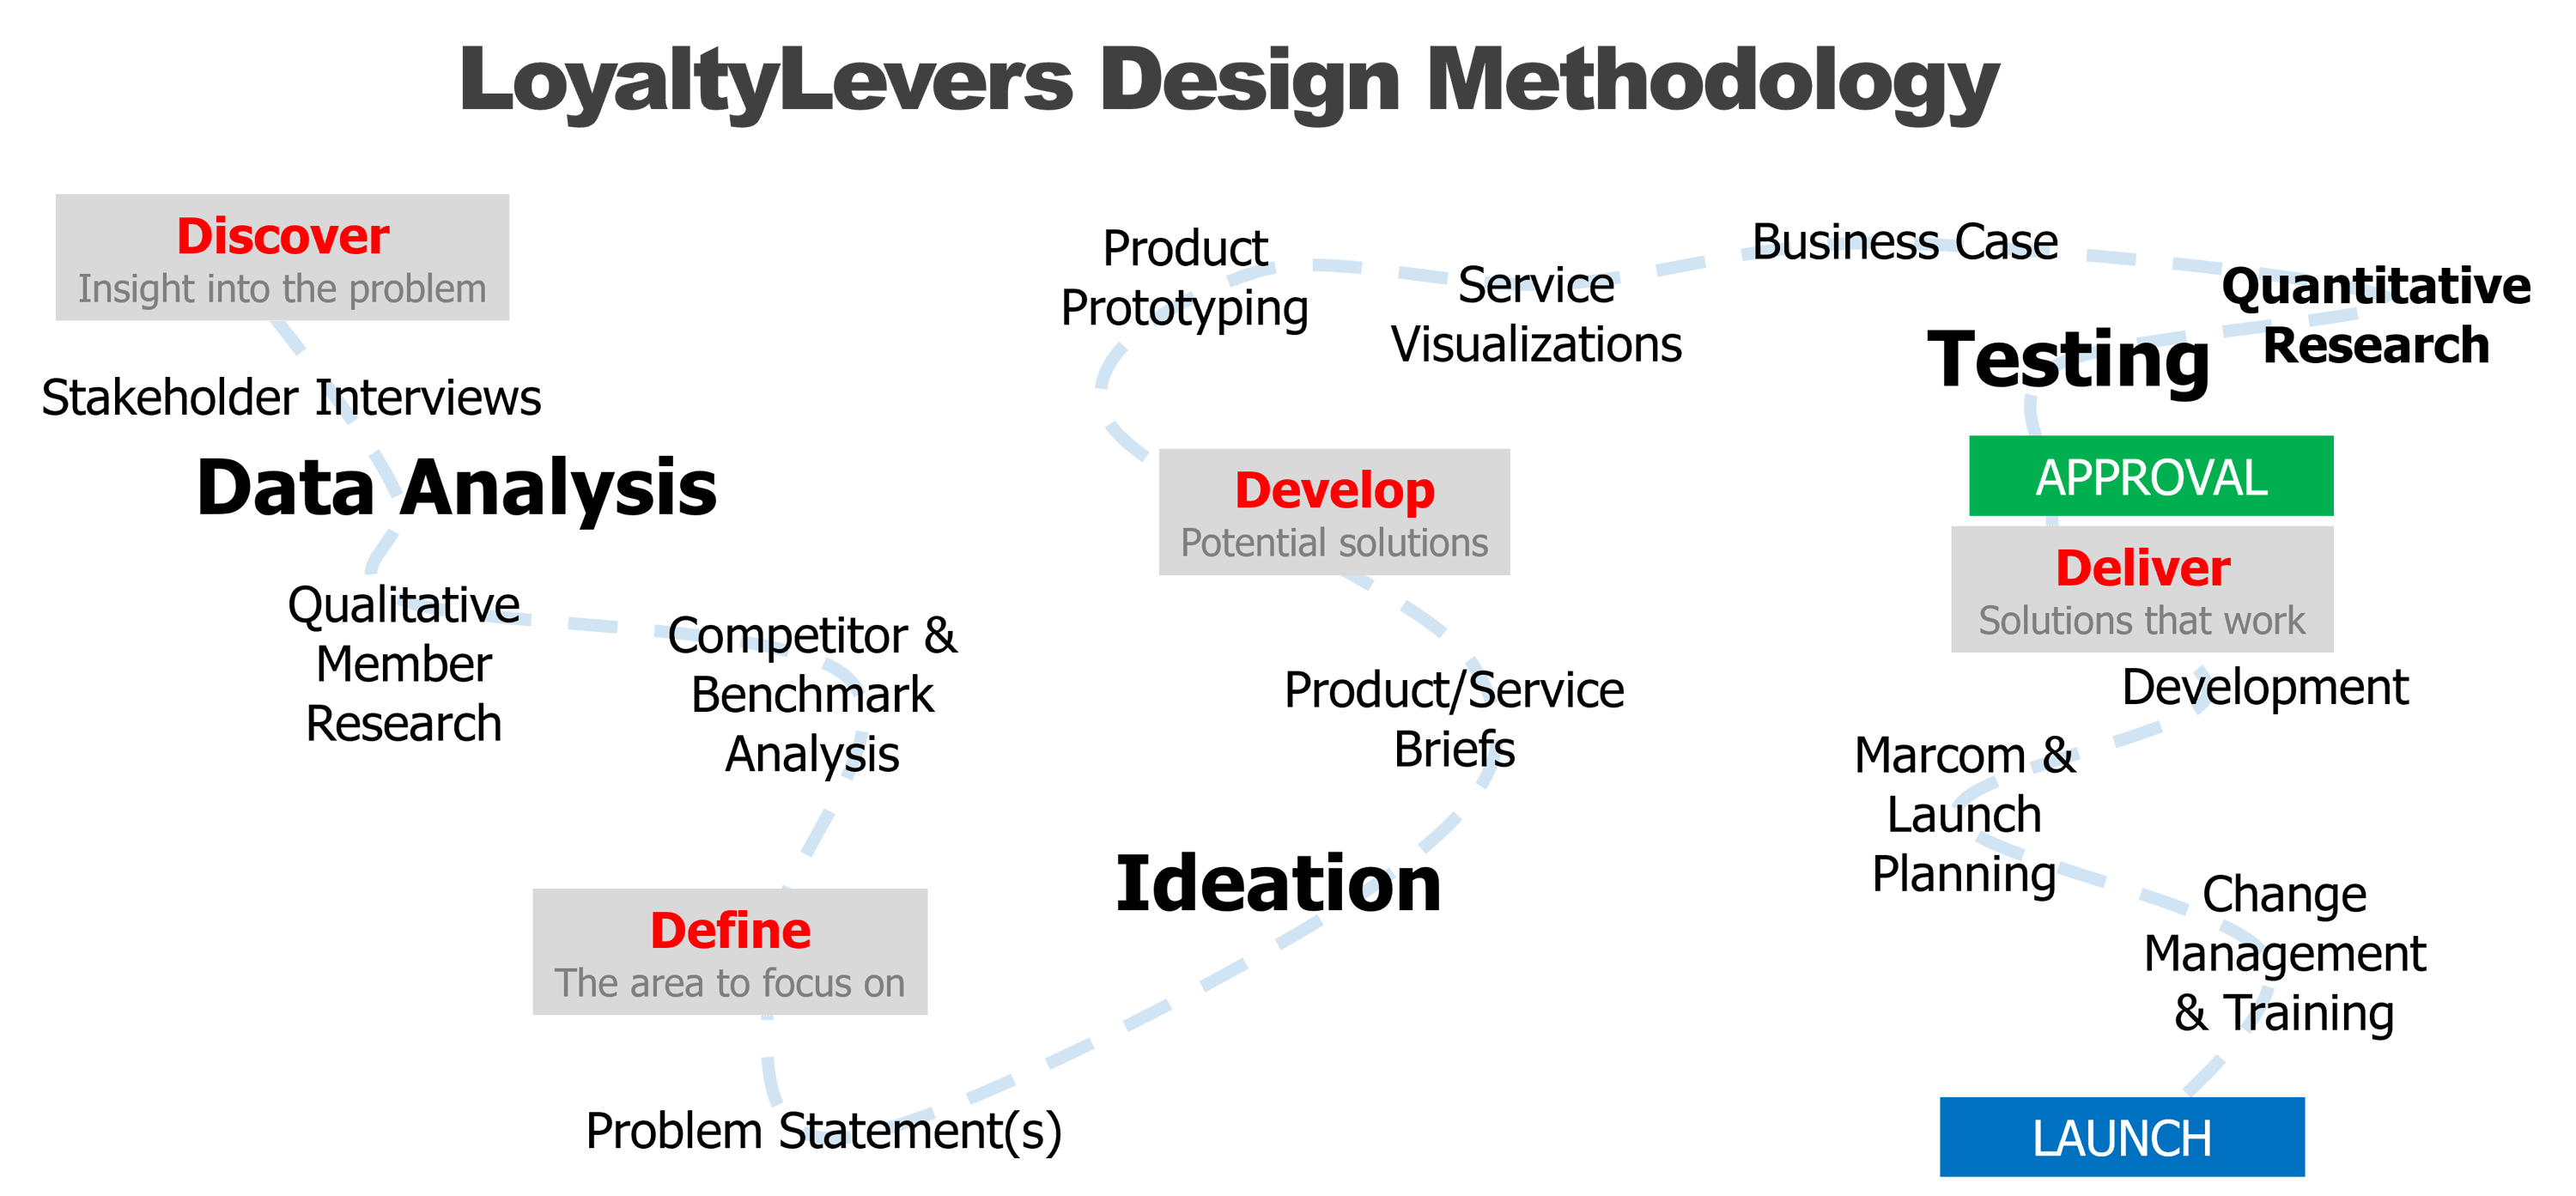 Loyalty Program Consulting, Loyalty Program Design - The LoyaltyLevers Design Methodology utilizes data analysis, ideation, prototyping and testing to deliver a compelling loyalty value proposition.